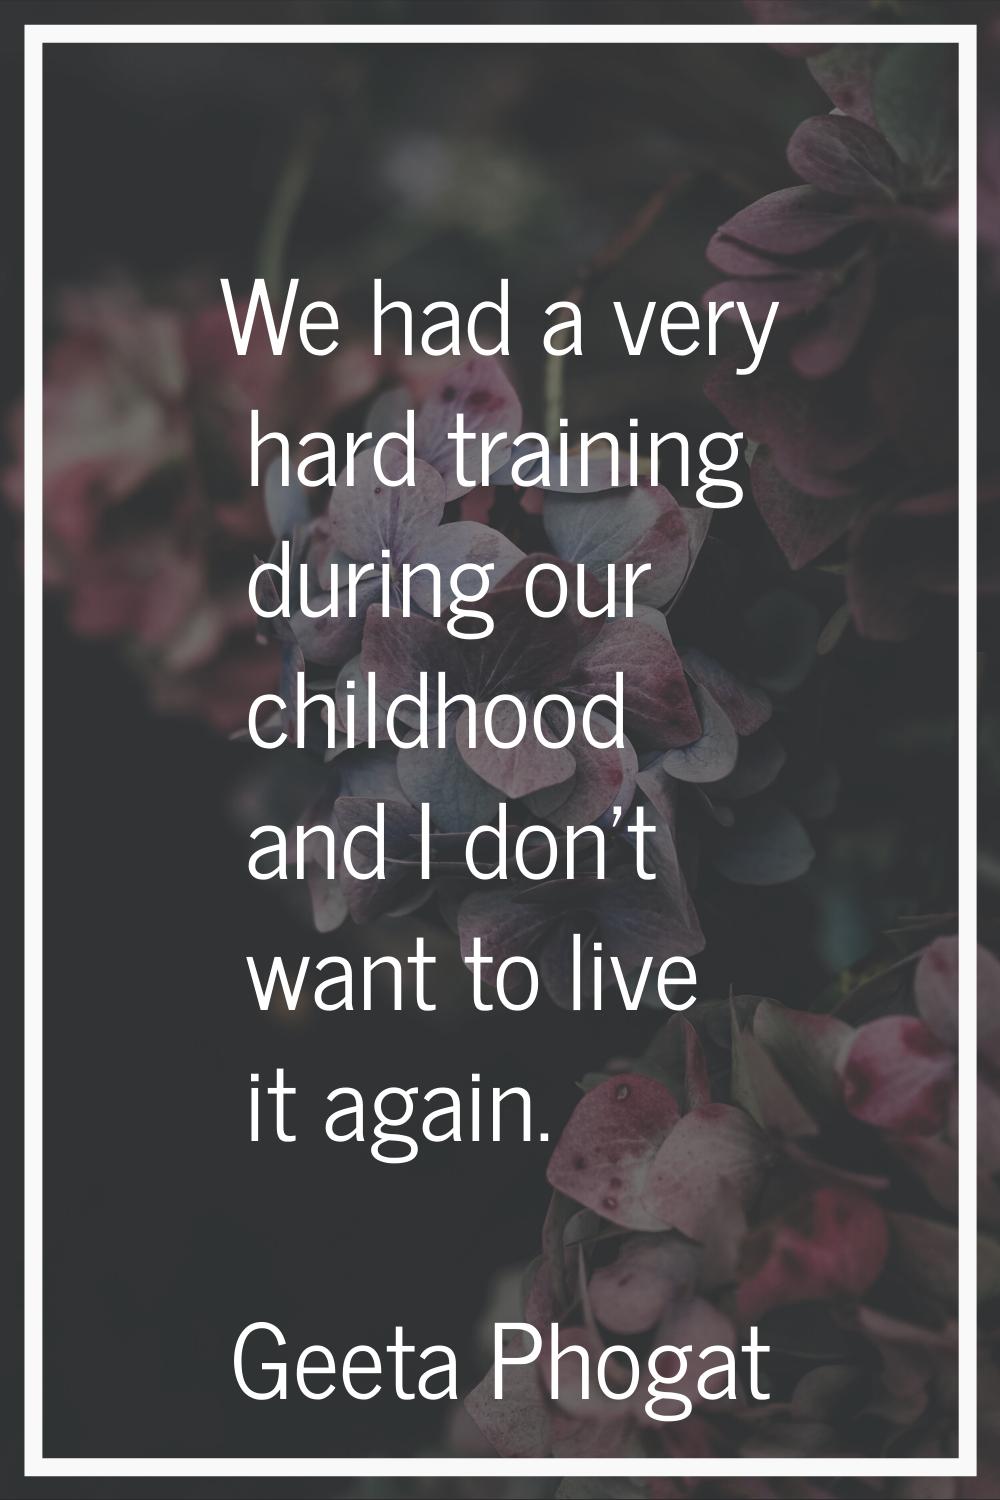 We had a very hard training during our childhood and I don't want to live it again.